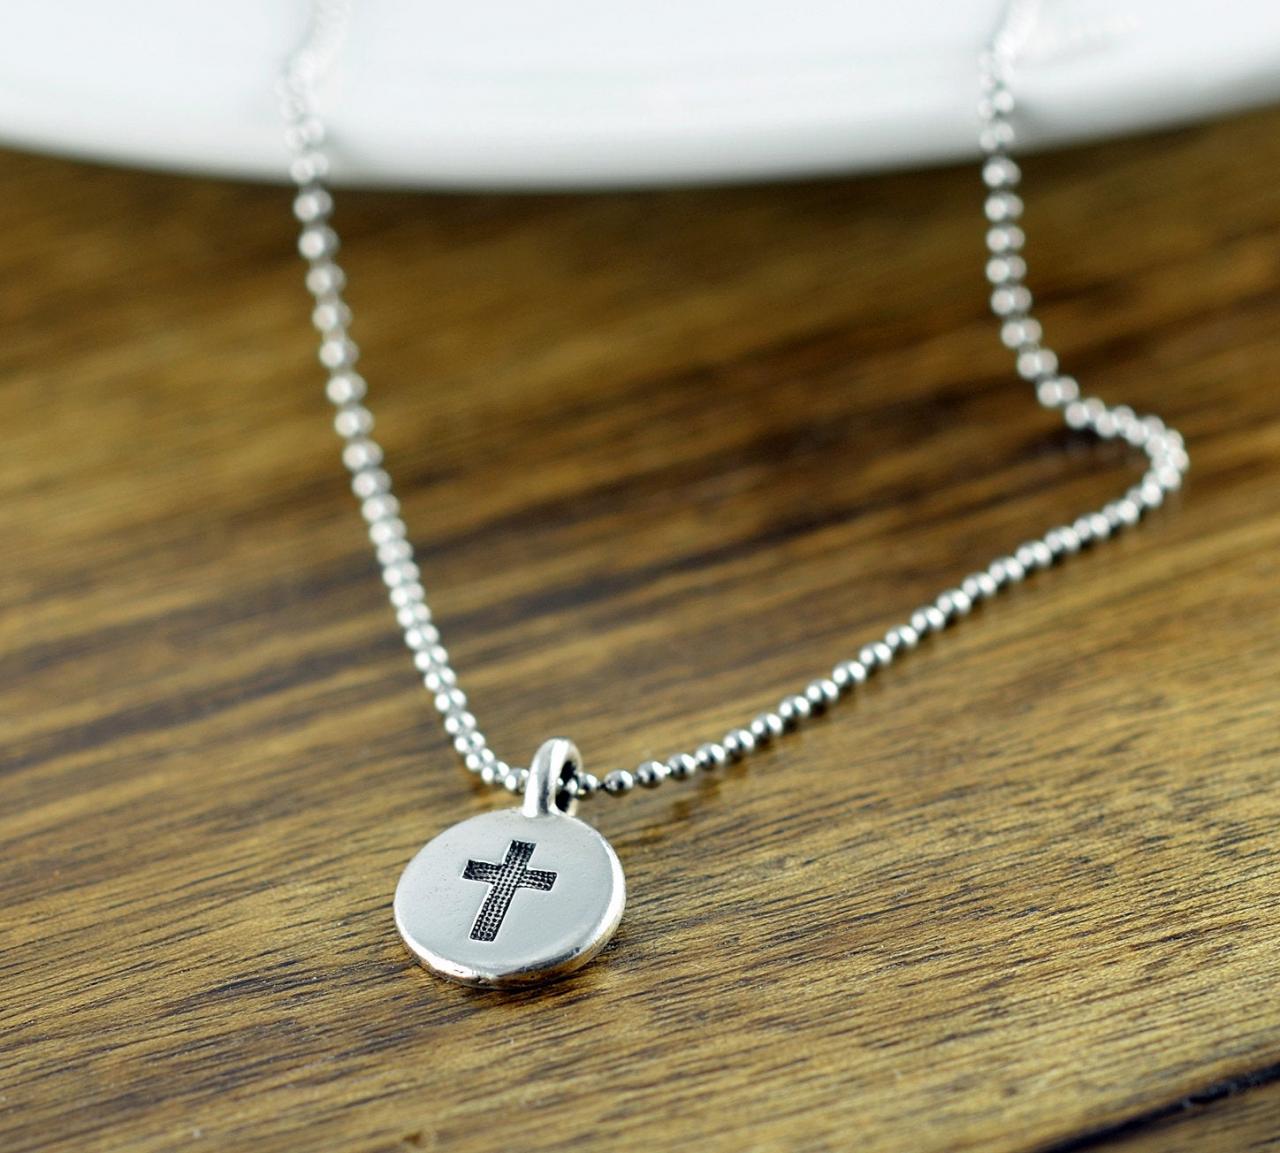 Mens Cross Necklace - Silver Cross Necklace - Mens Pewter Cross Necklace - Cross Necklace - Gift For Men - Mens Gift - Christian Gifts